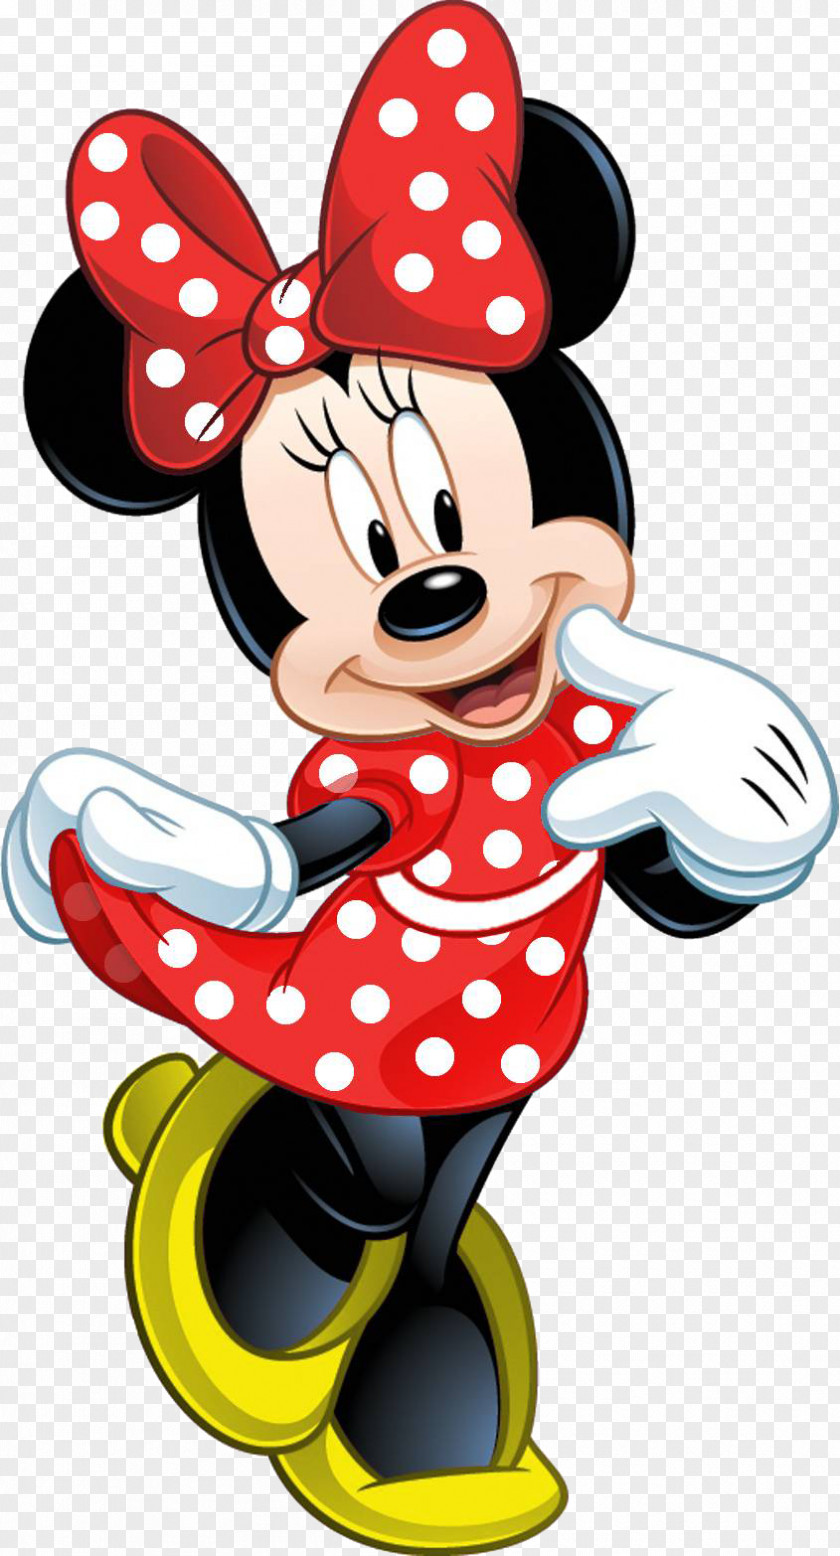 Minnie Mouse Mickey Daisy Duck Donald PNG